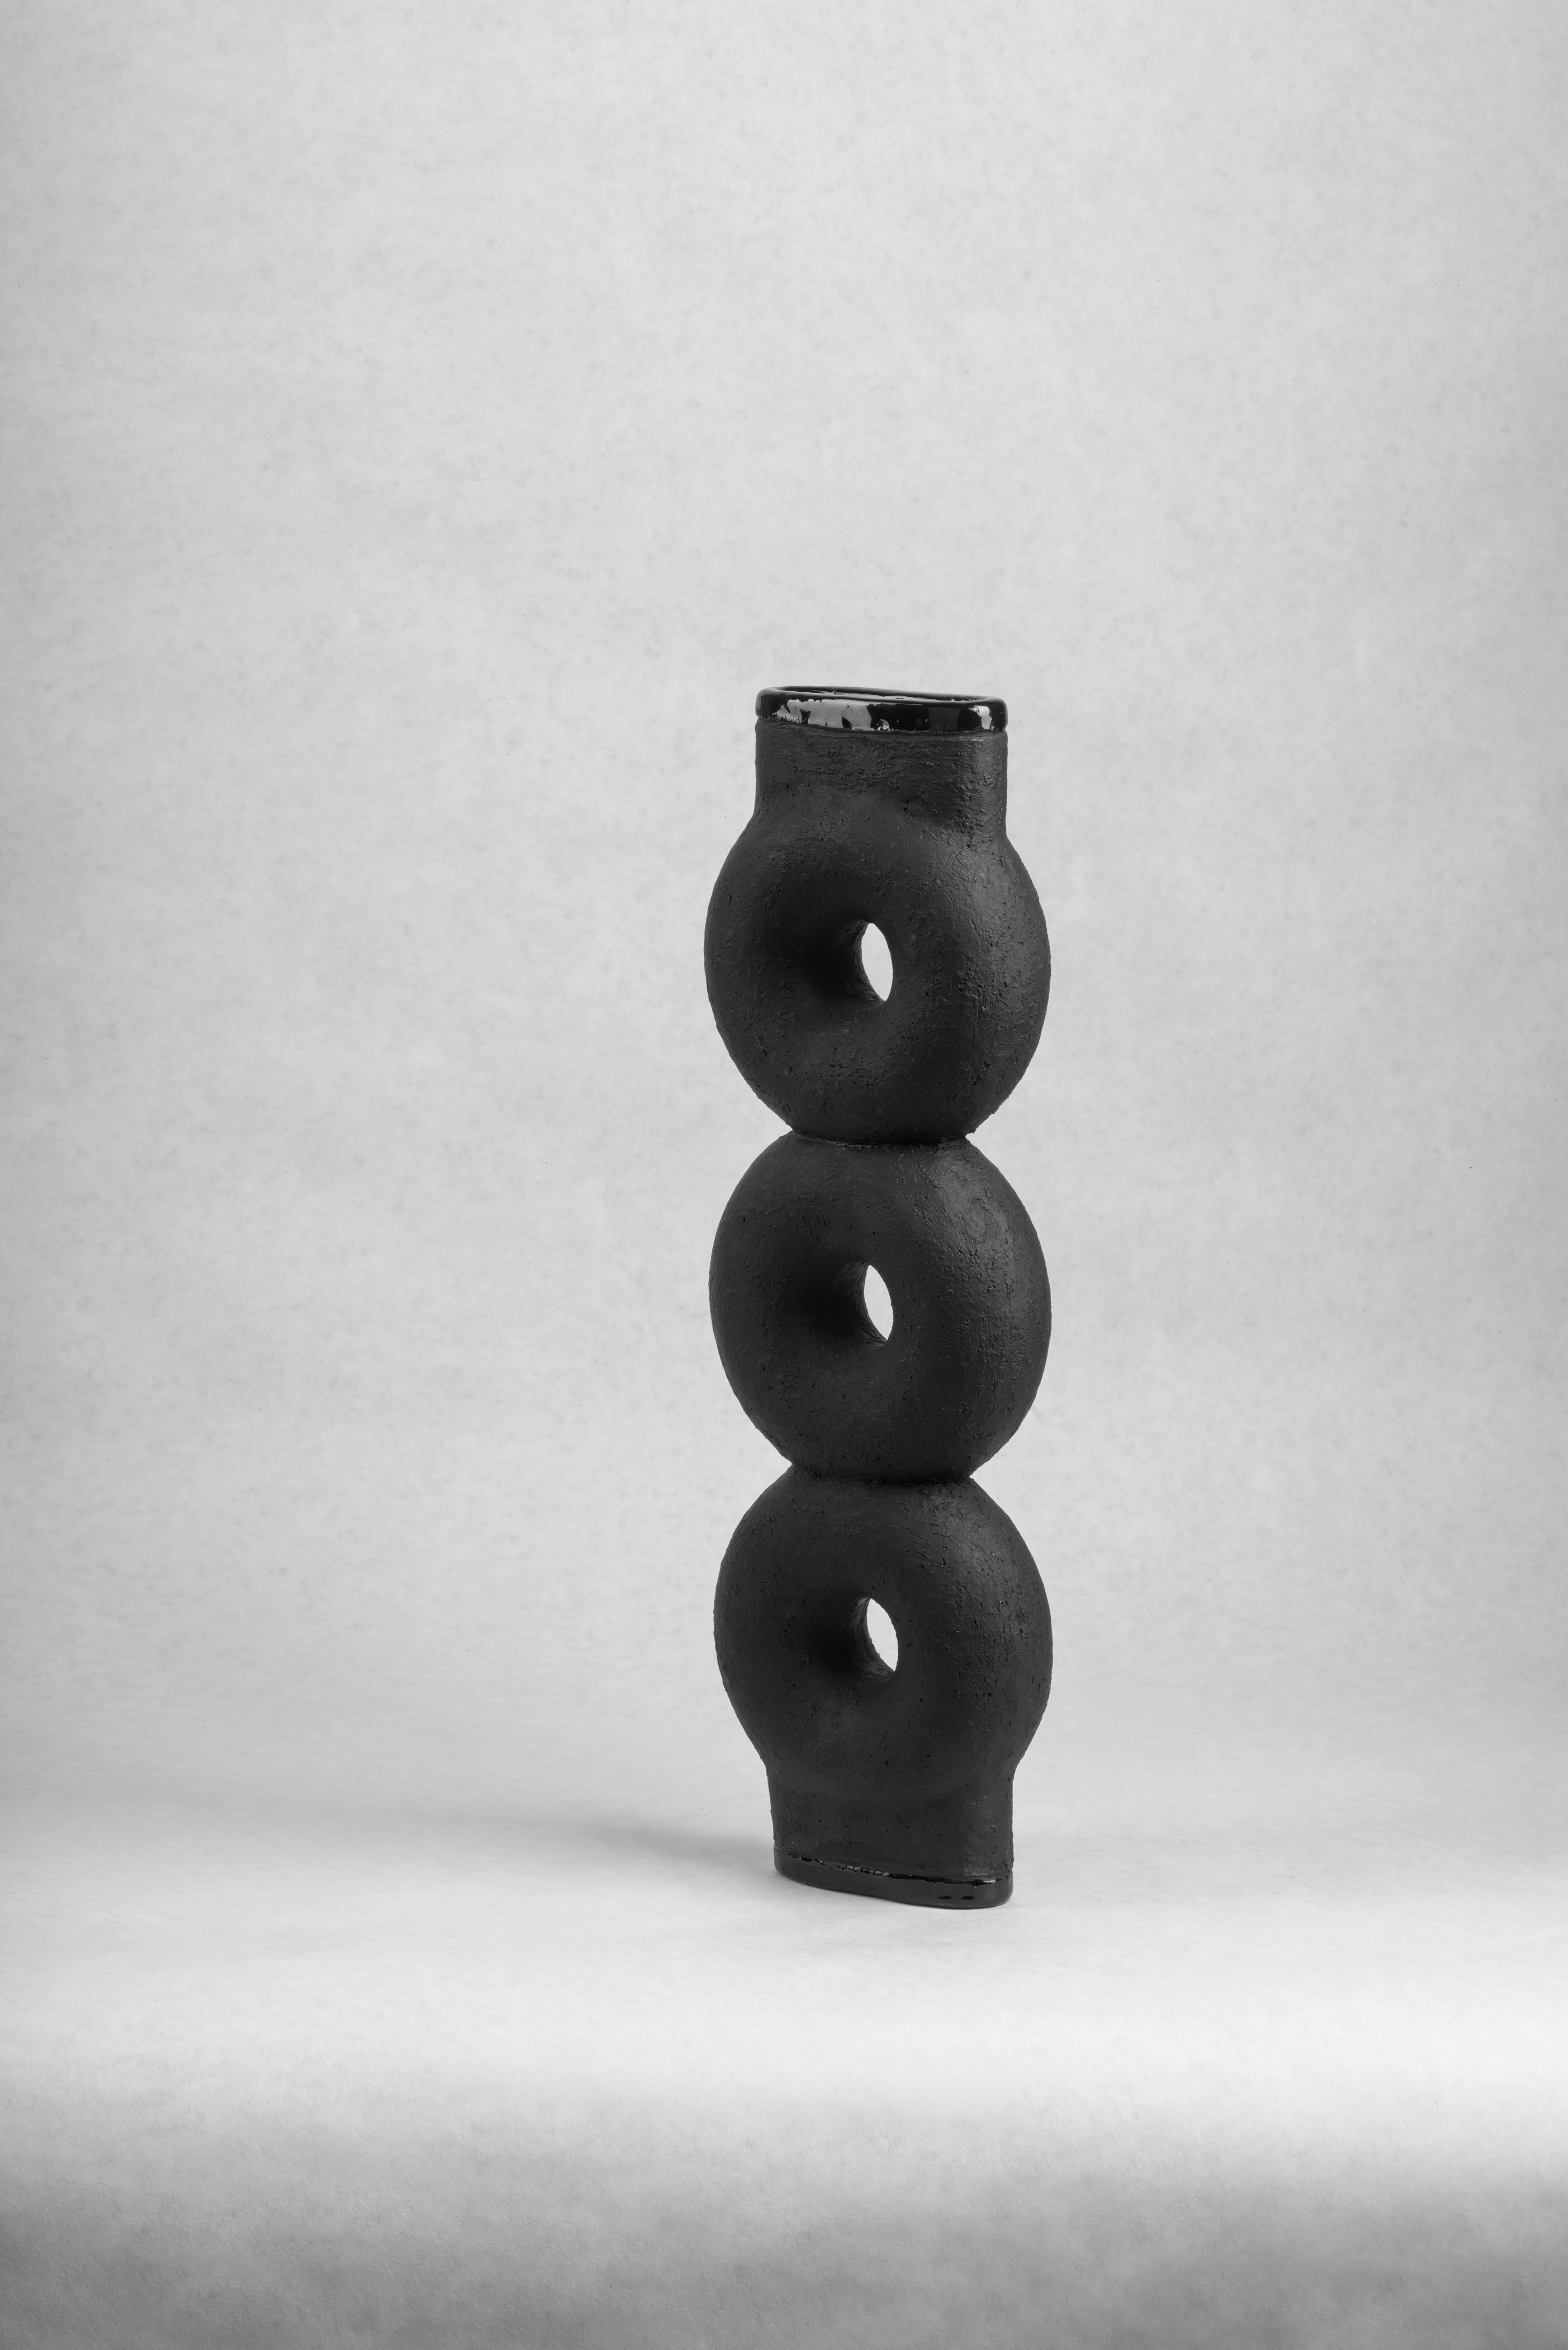 Sculpted ceramic vase by FAINA
Design: Victoriya Yakusha
Material: Material: clay / ceramics
Dimensions: 14 x 5 x H 43.5 cm


The vase is part of a series of 5 vases, the set of vases consists of :

1. Vase on three legs height 500 x width